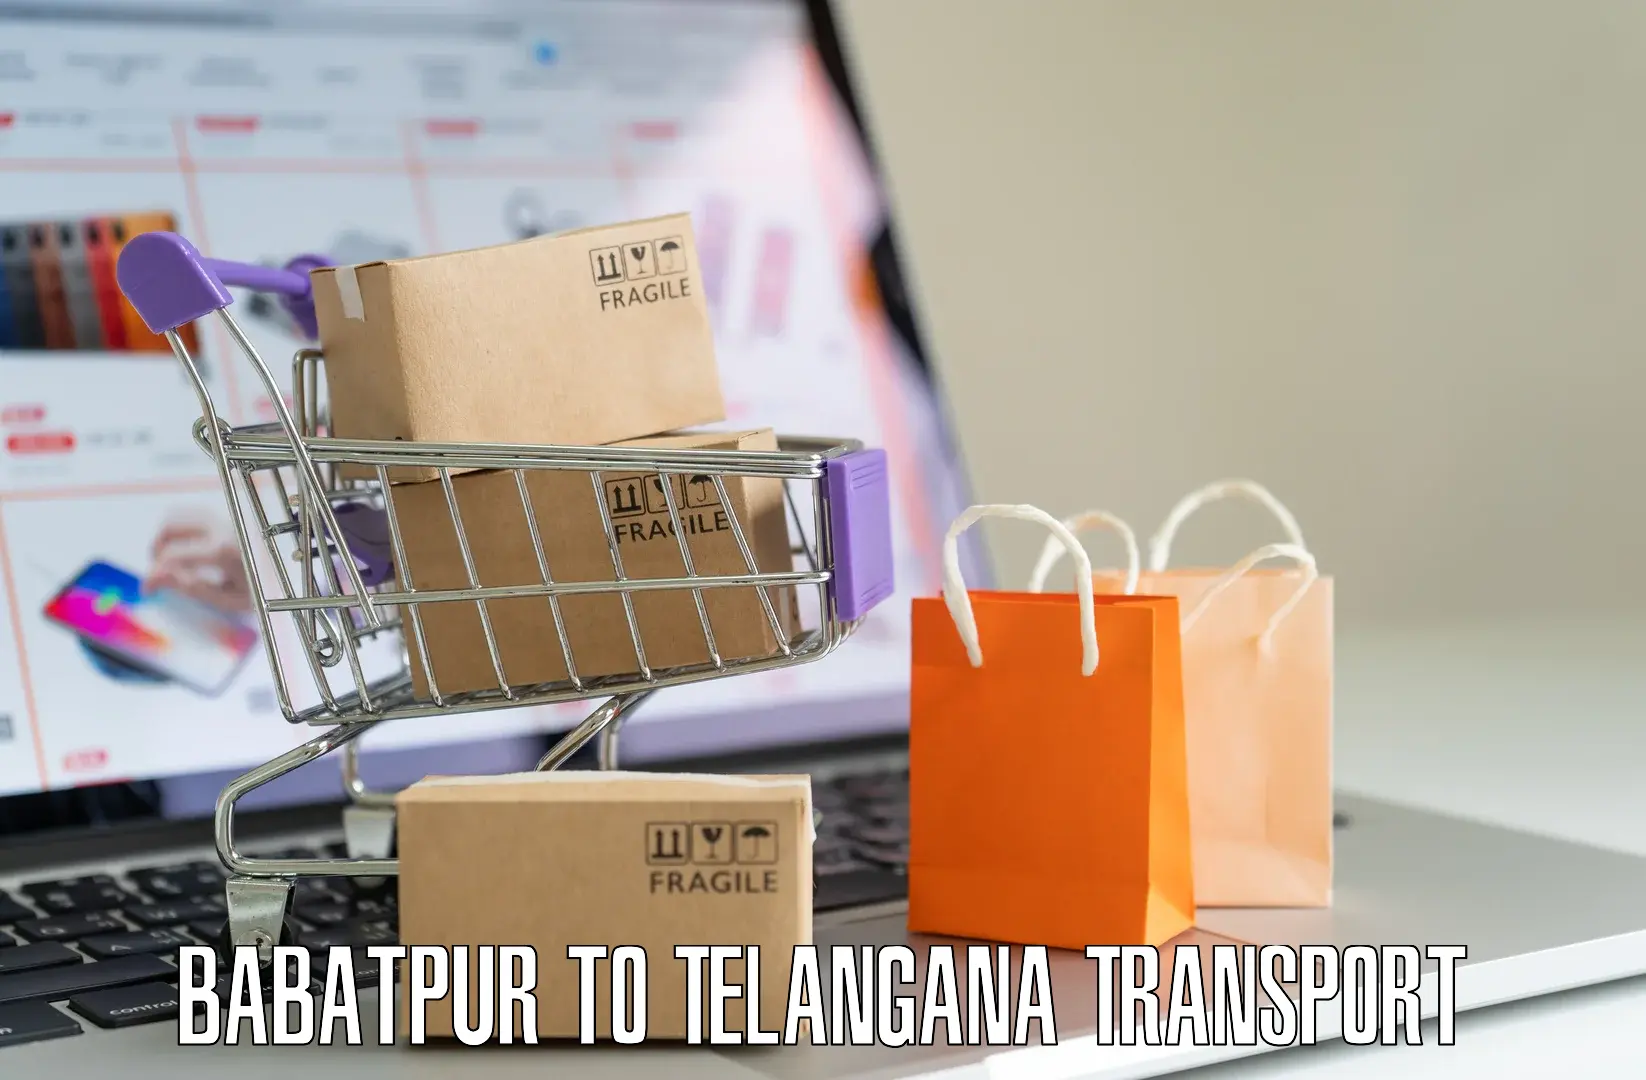 Transport services Babatpur to Hyderabad